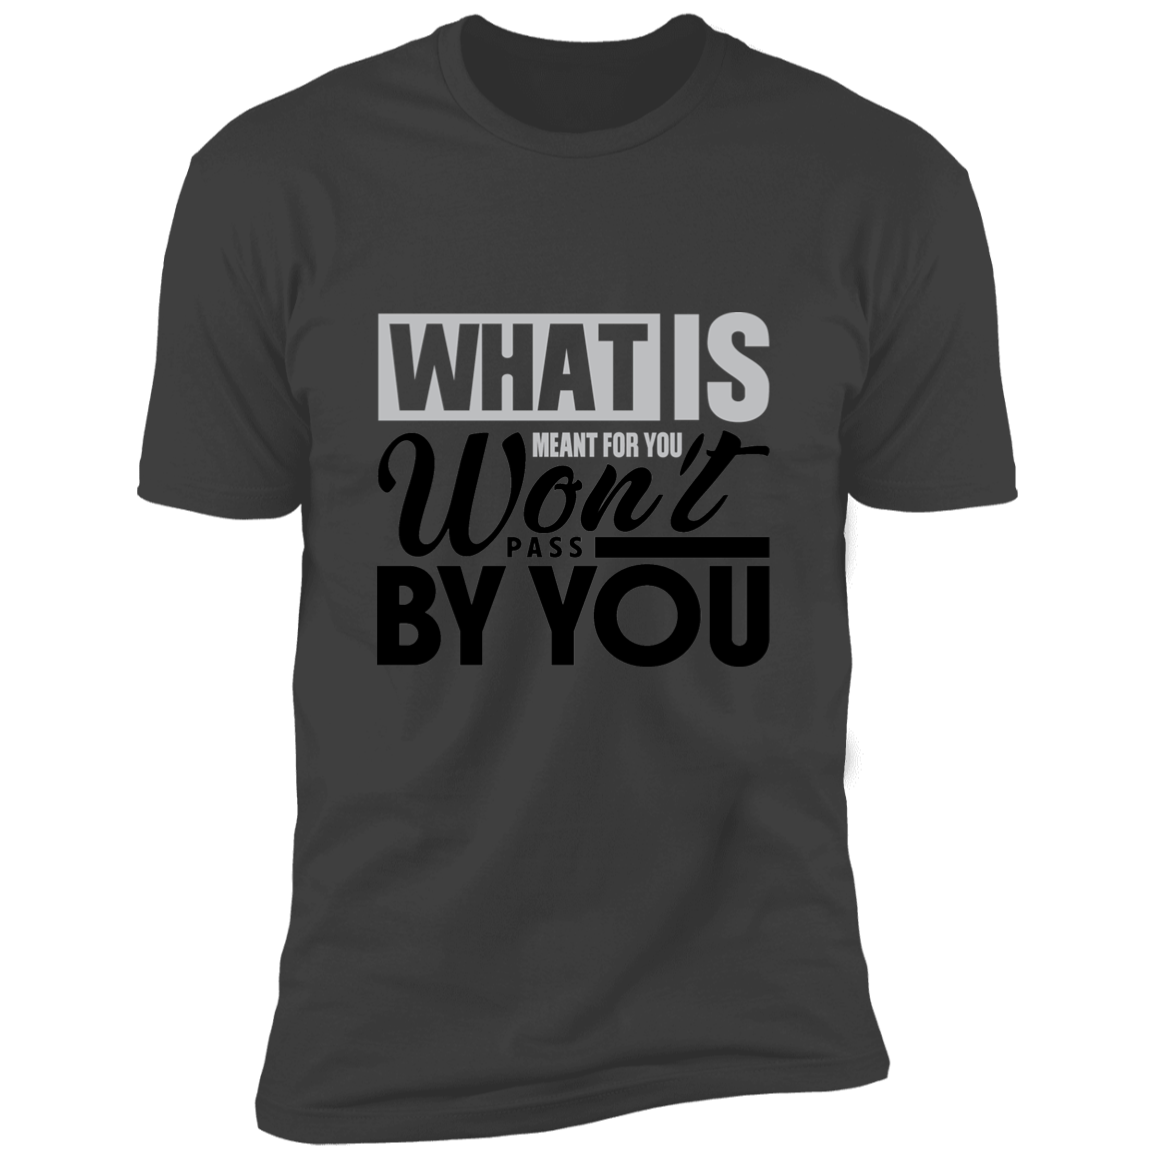 WHAT IS FOR YOU Short Sleeve Tee